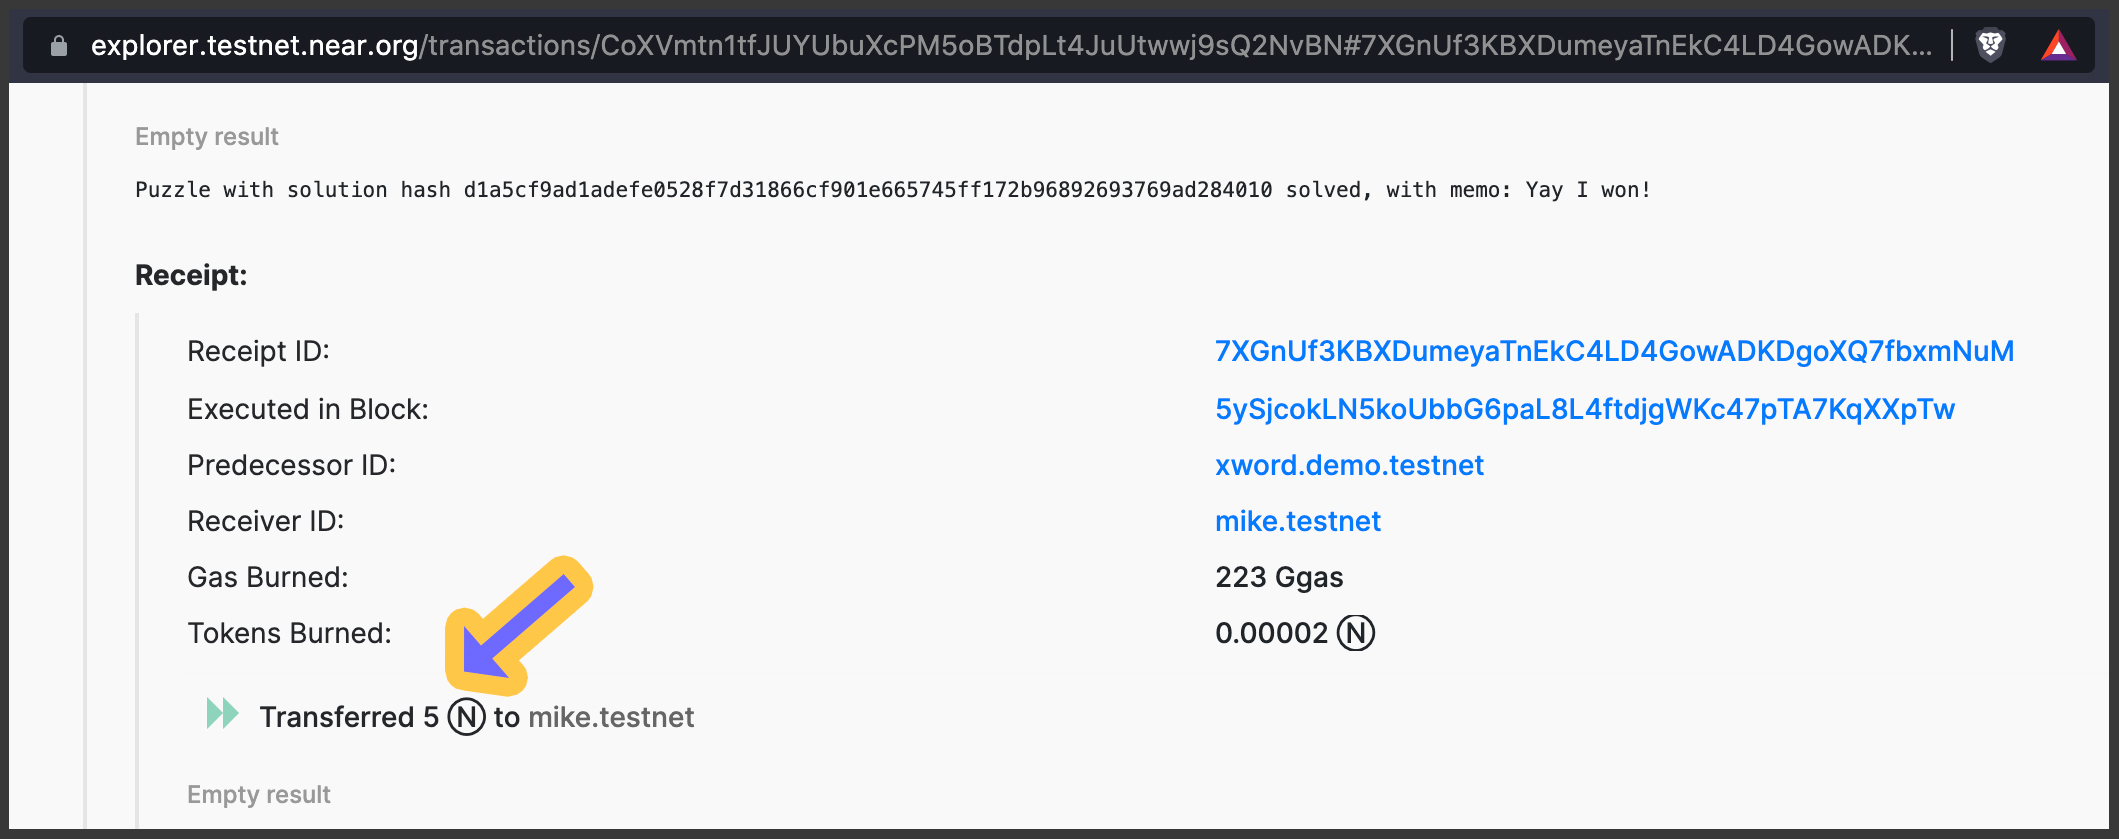 Screenshot from the NEAR Explorer highlighting a place in the transaction where 5 NEAR is sent to mike.testnet